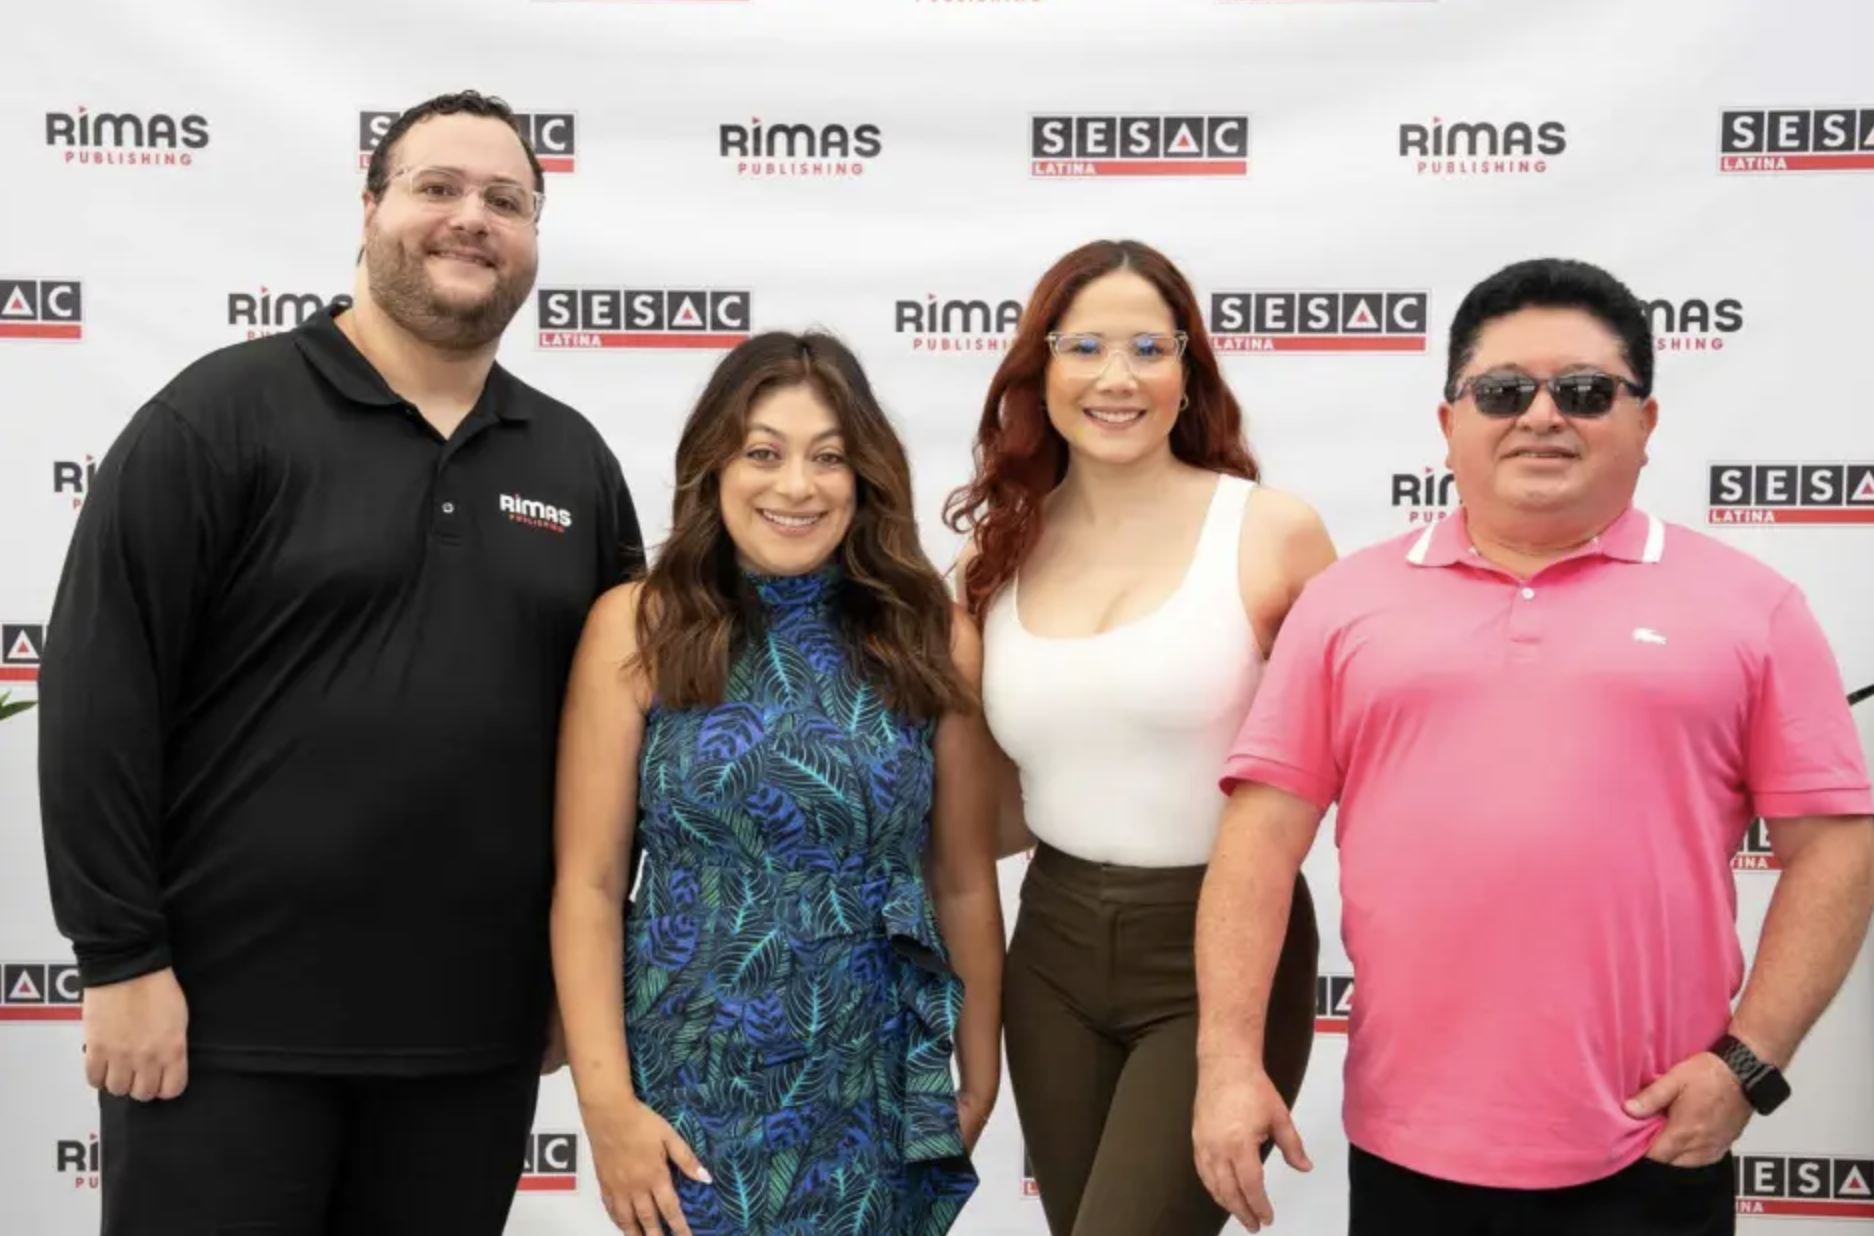 SESAC Latina & Rimas Publishing Join Forces for ‘Music 101’